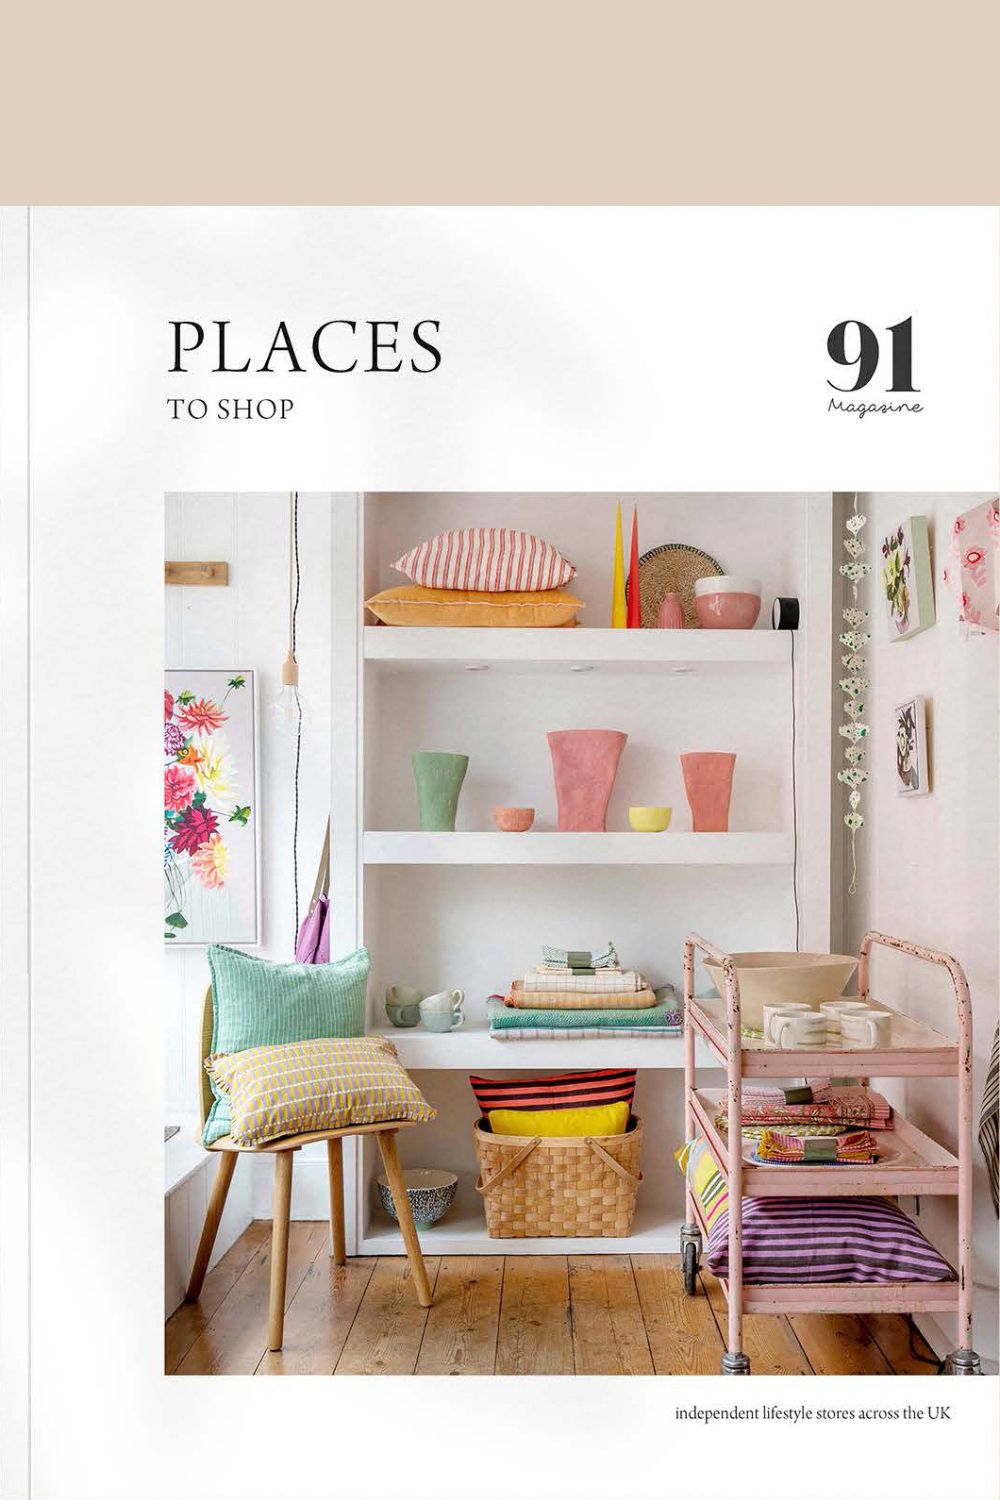 Places to Shop from 91 Magazine cover